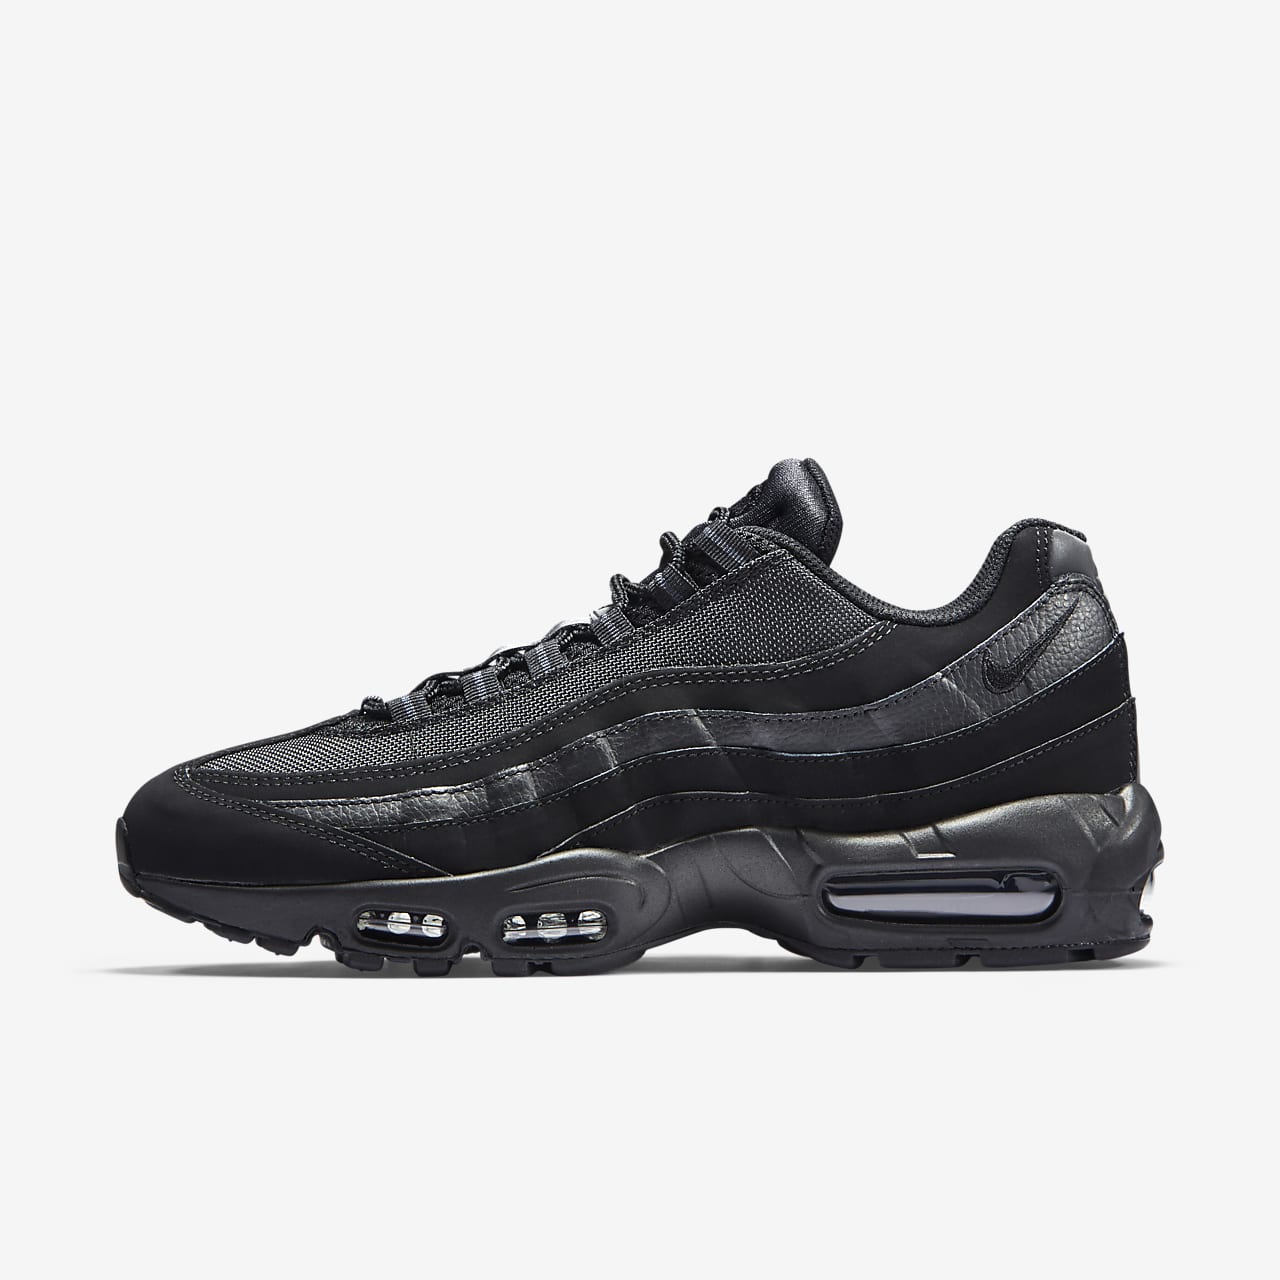 Airmax 95 Nere Factory Sale, UP TO 67% OFF